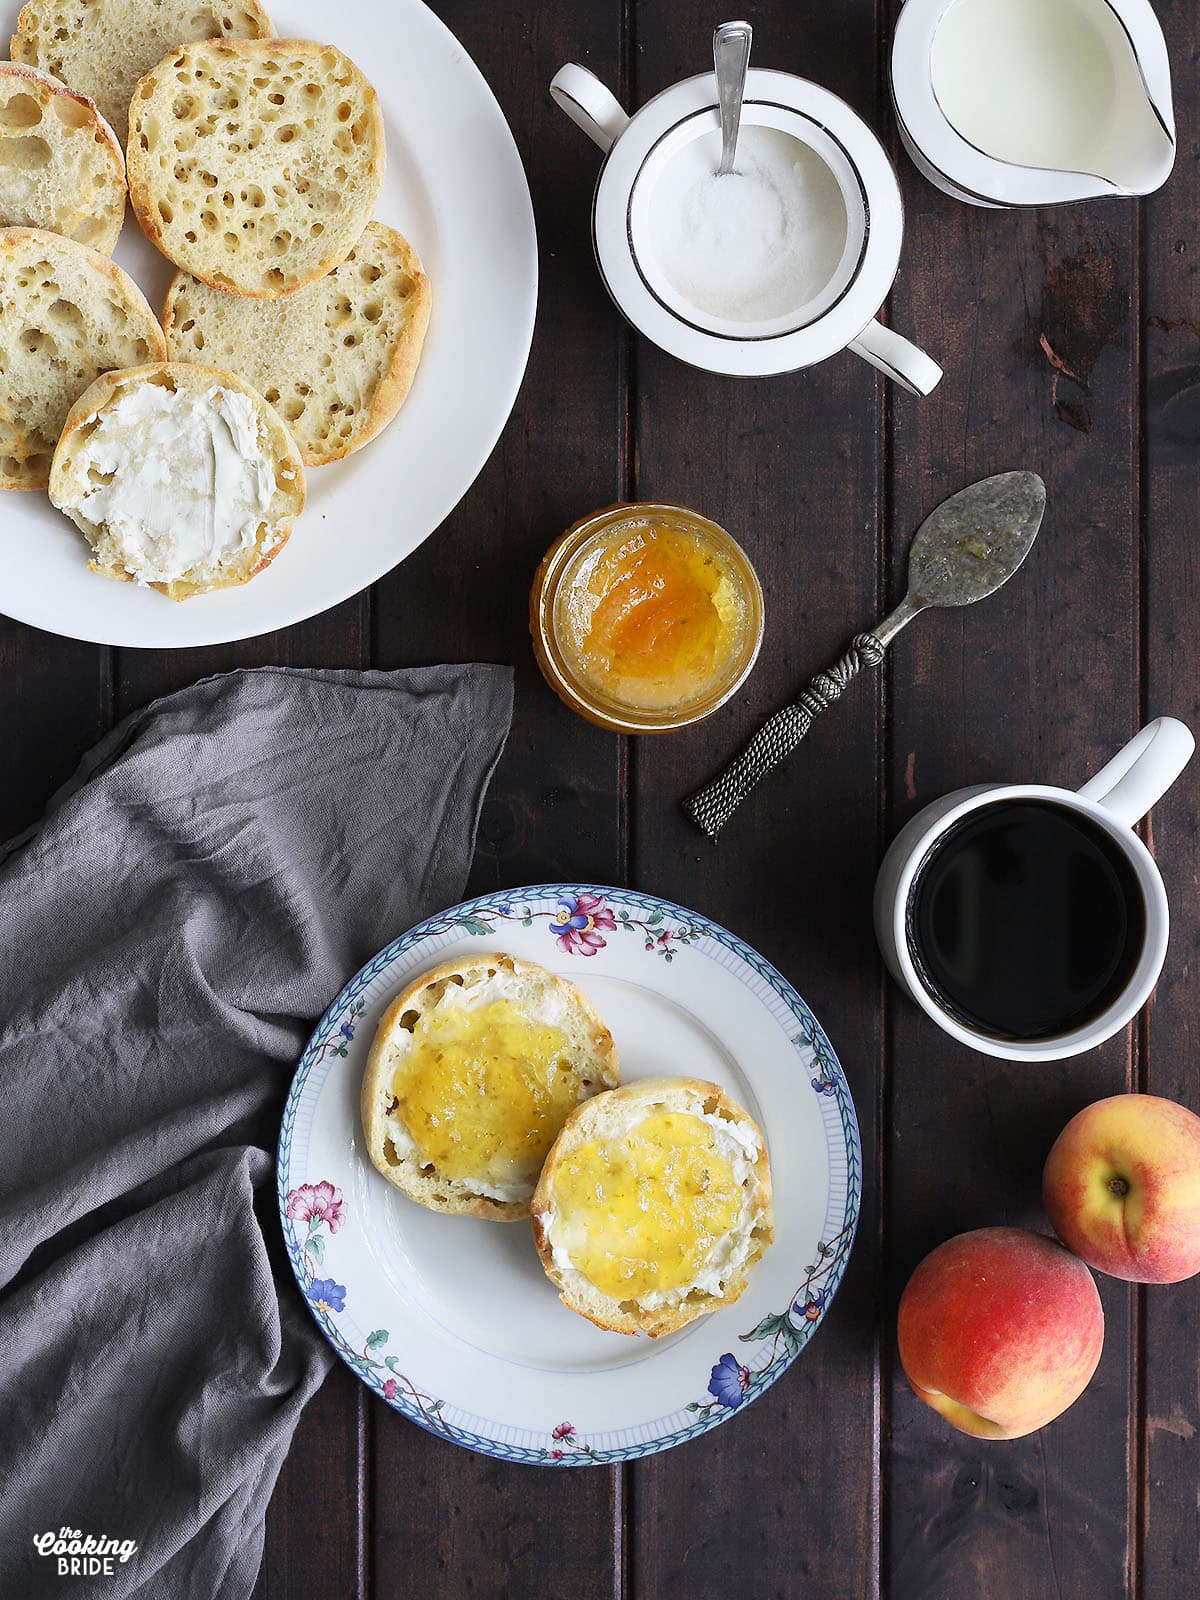 Two English muffins on a blue and white floral plate. Plate of English muffins, jam, coffee, peaches, cream and sugar to the side on a dark wooden table.